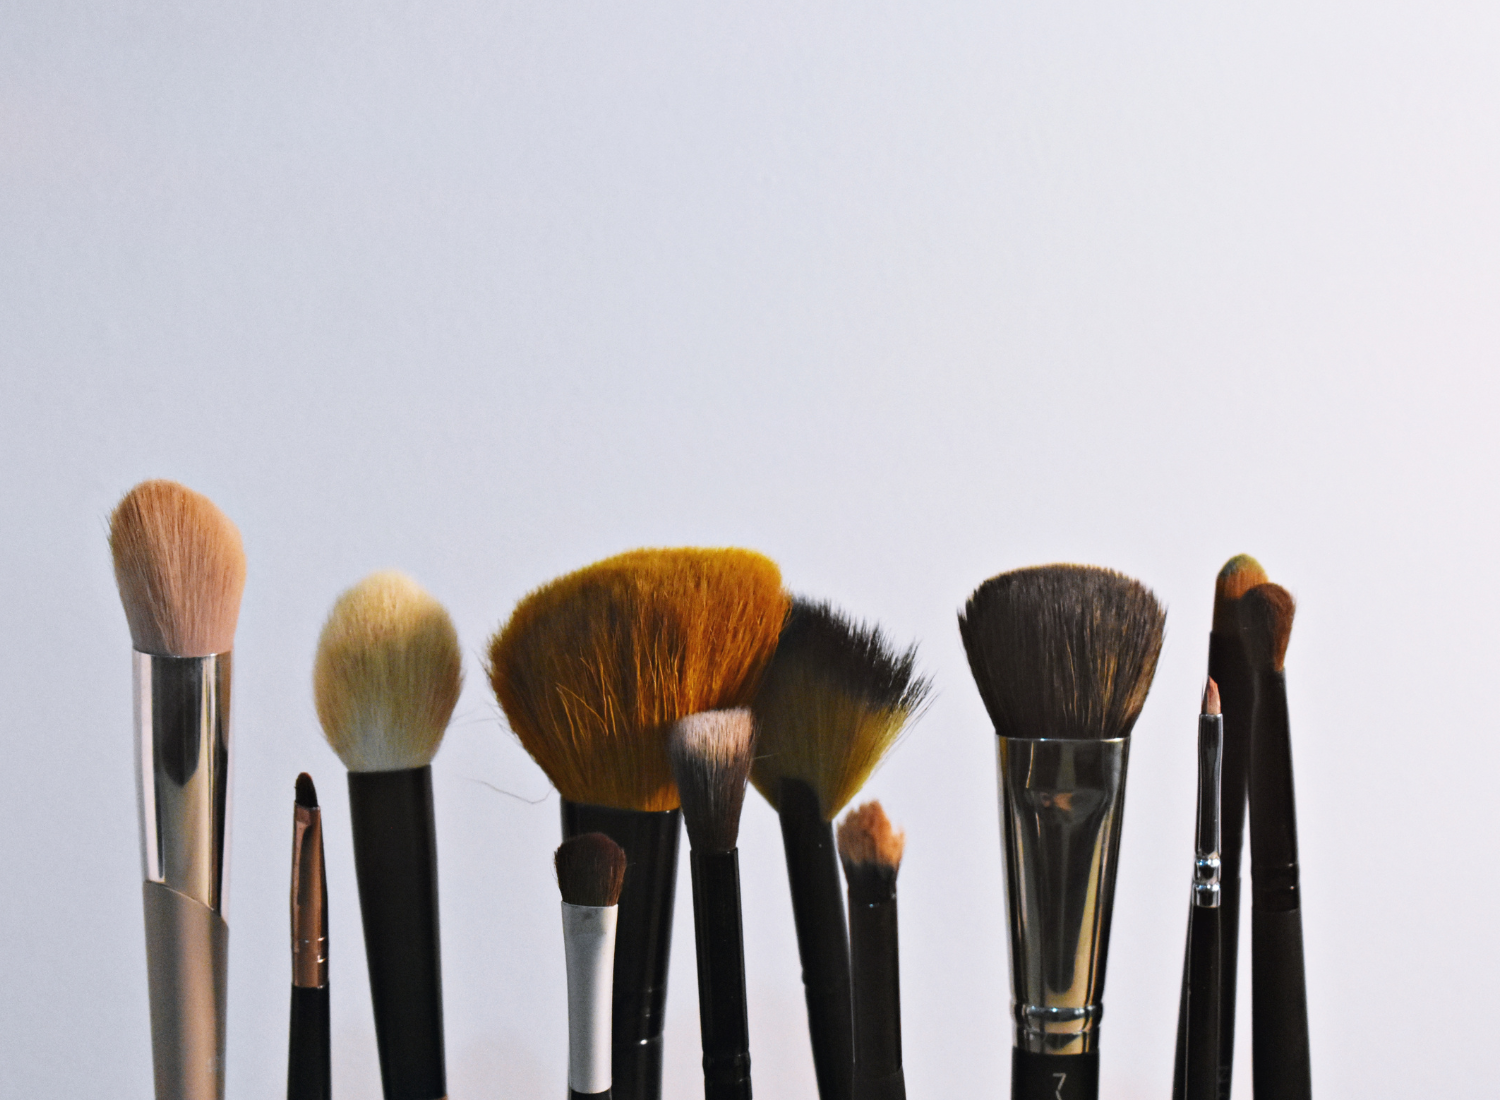 The best way to clean makeup brushes at home